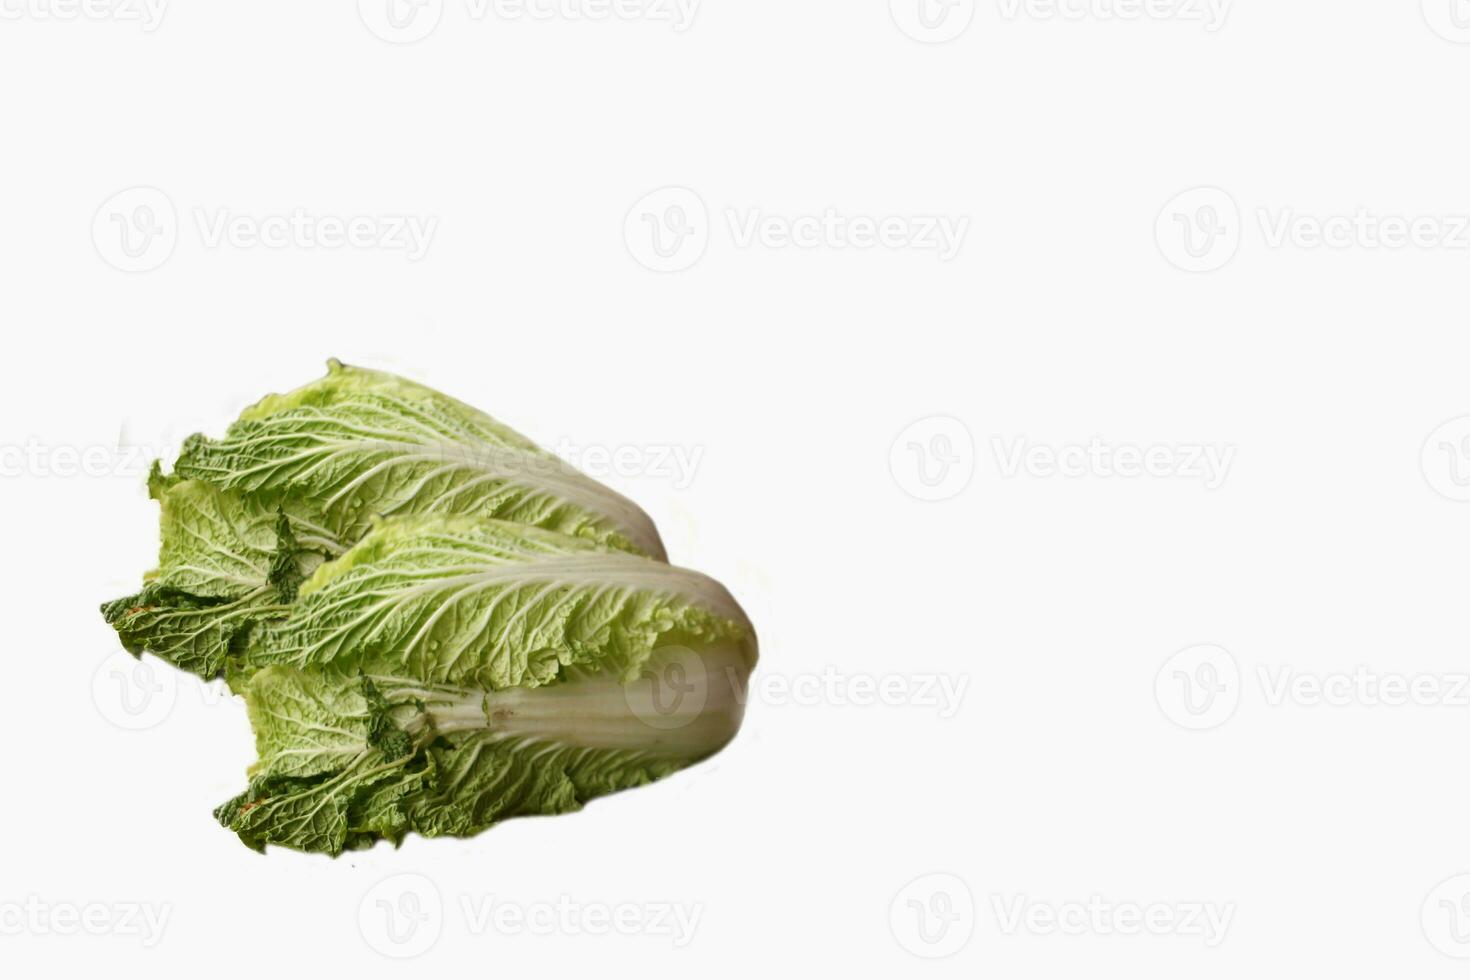 mustard greens on a plain white background photo